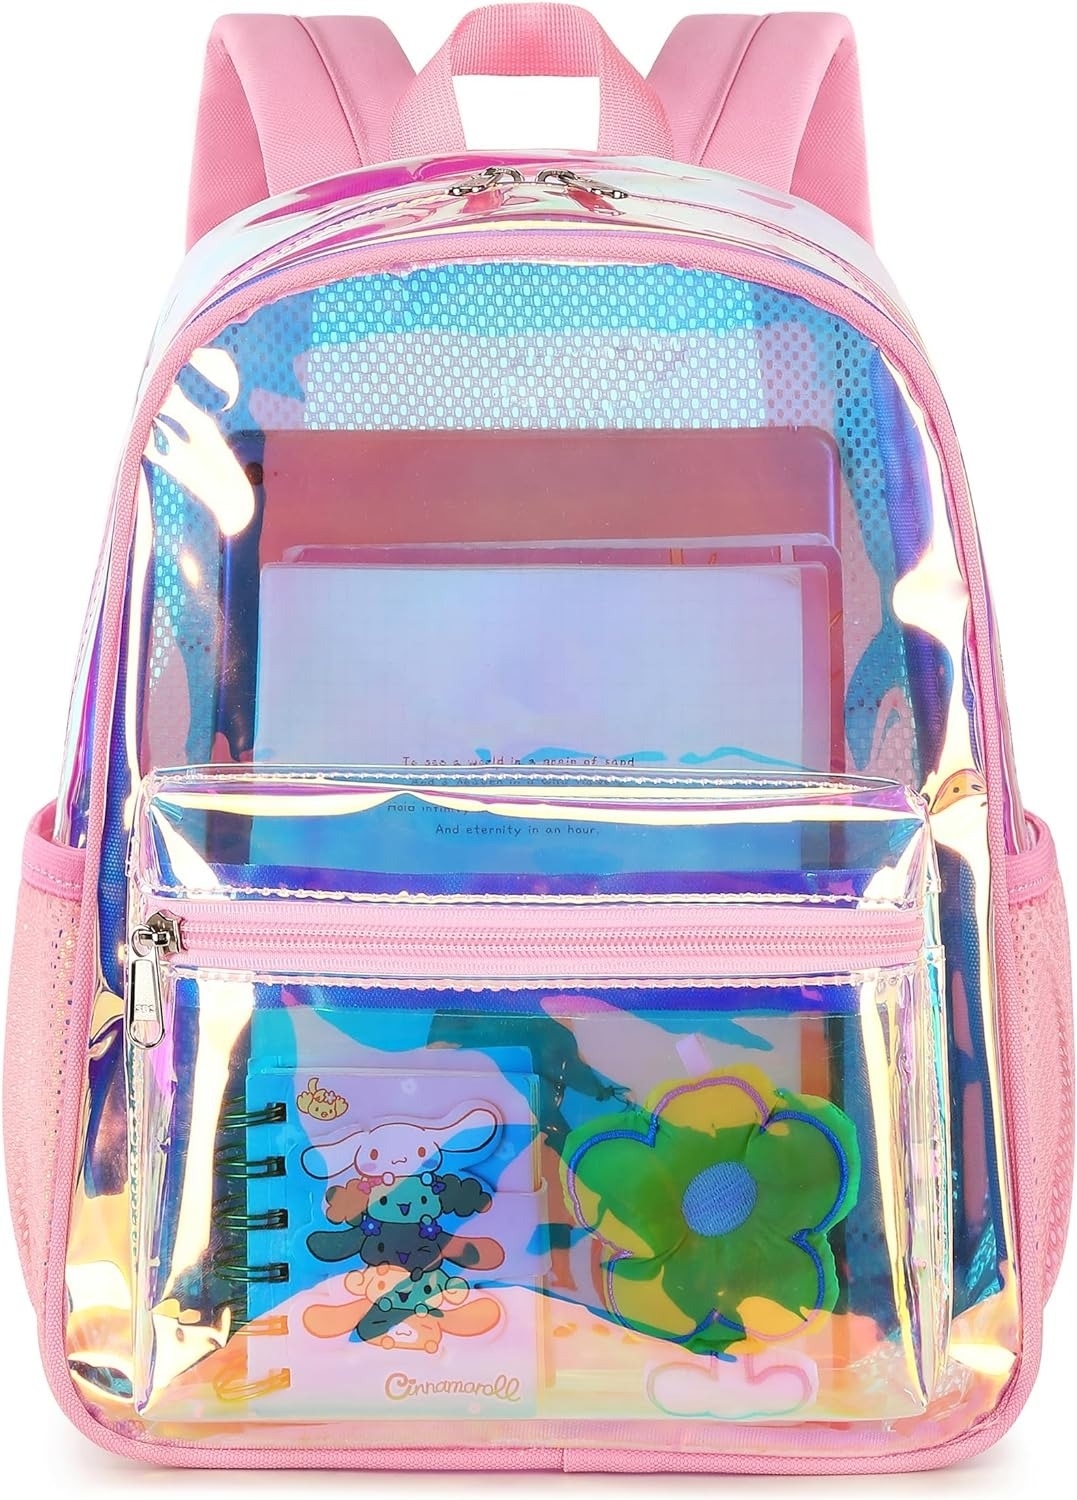 A clear iridescent backpack with pink straps and accents, containing a notebook with a cartoon character, a green flower notebook, and a few folders inside